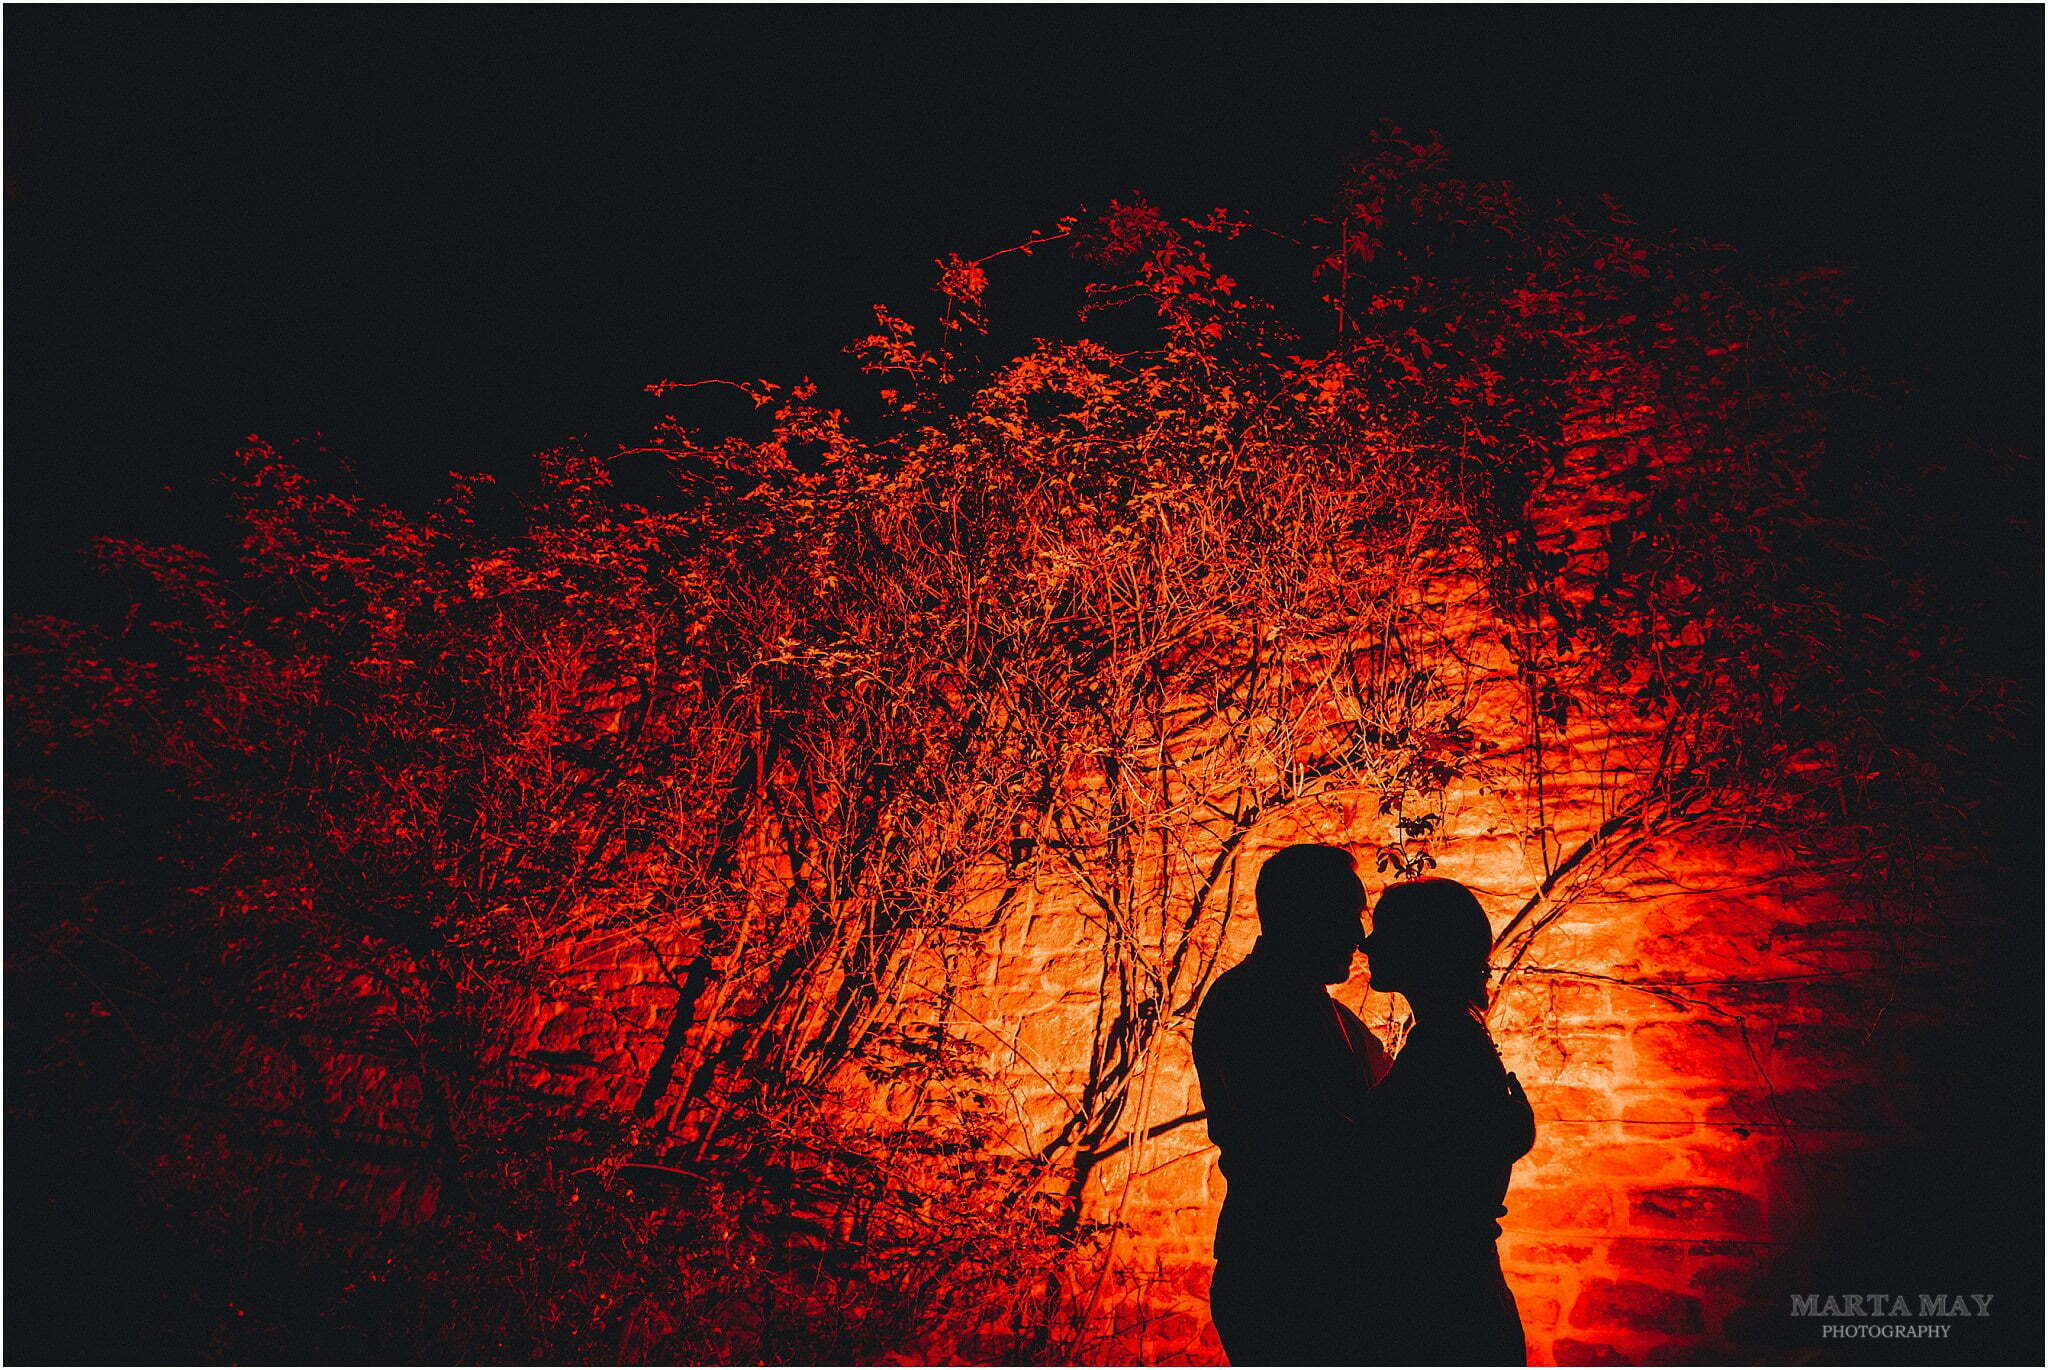 The Best of wedding photography 2017